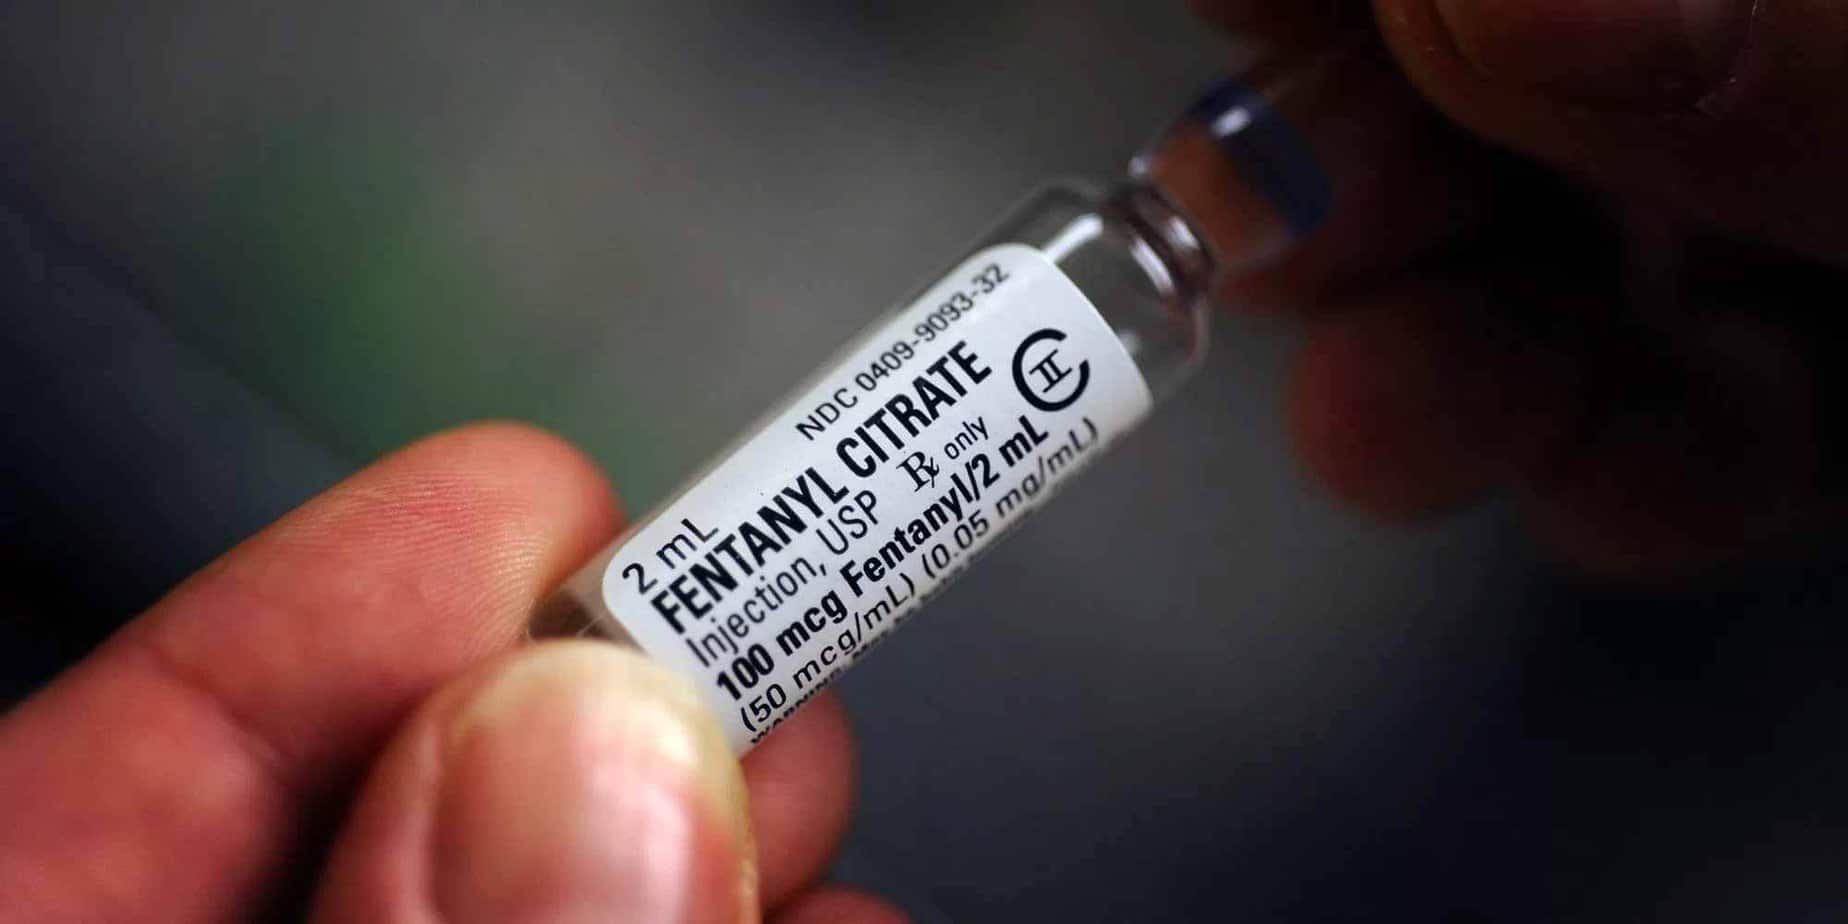 What You Need to Know About Fentanyl